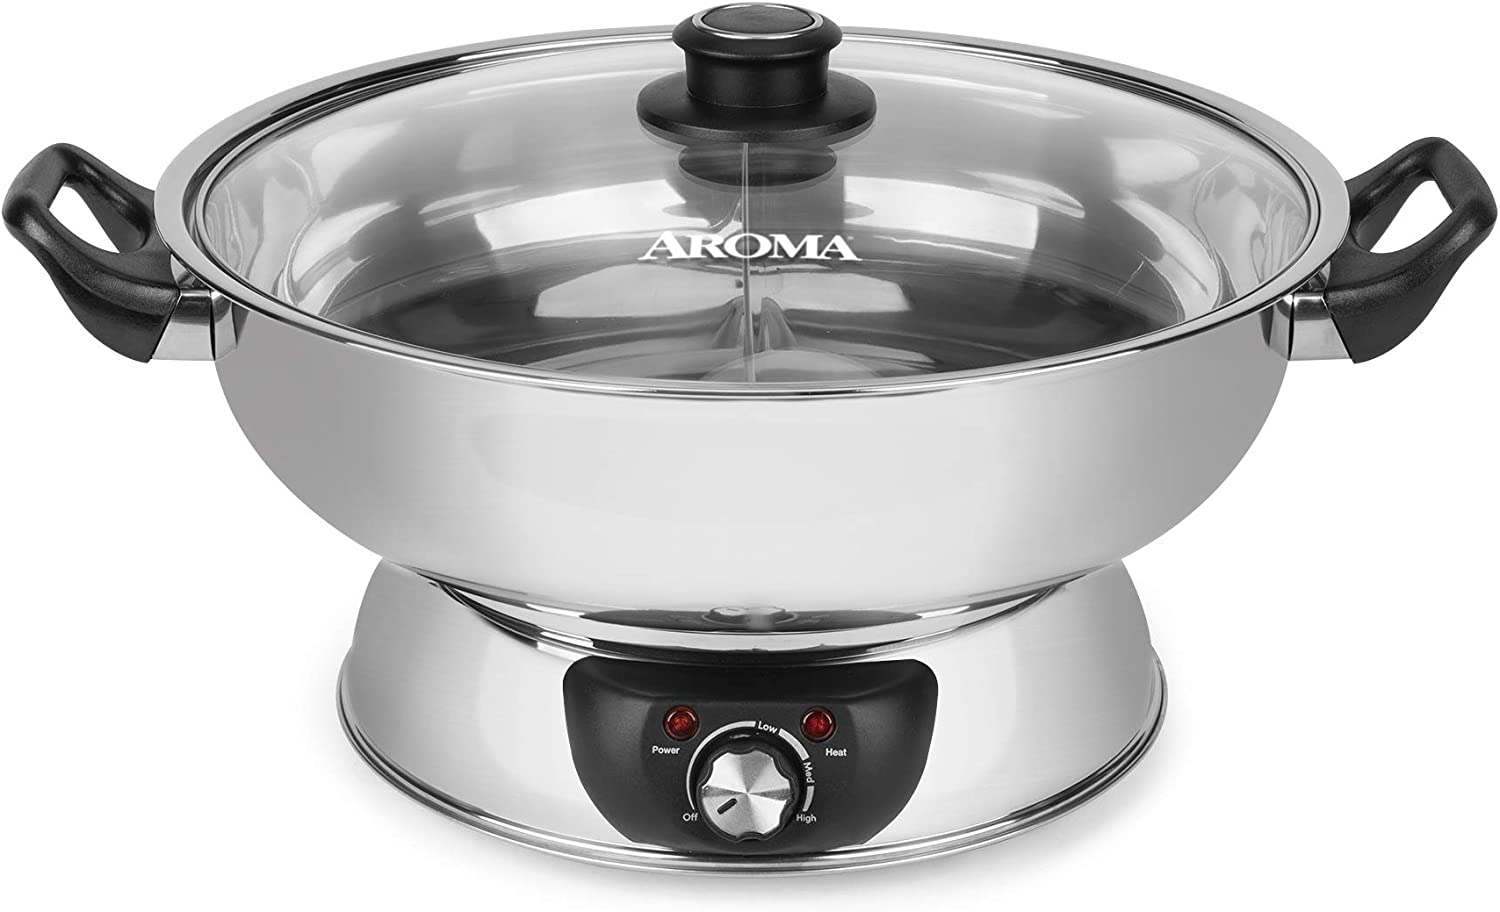 Aroma Housewares ASP-610 Dual-Sided Shabu Hot Pot, 5Qt, Stainless Steel Aroma Housewares 3 Uncooked/6 Cups Cooked Rice Cooker,